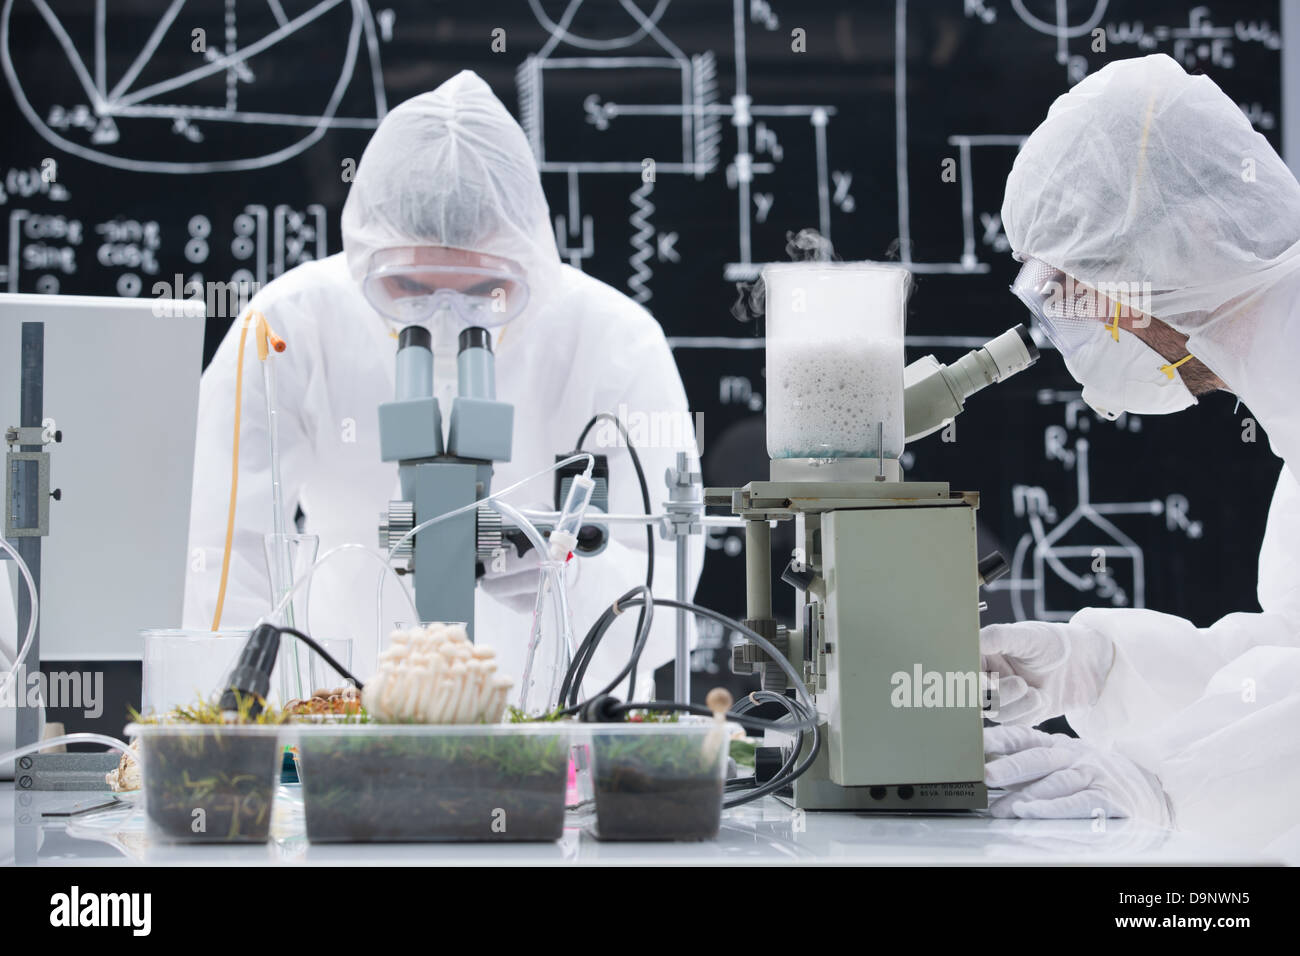 general-view of two people analyzing under microscope in a chemistry lab around sprouted plants and mushrooms Stock Photo